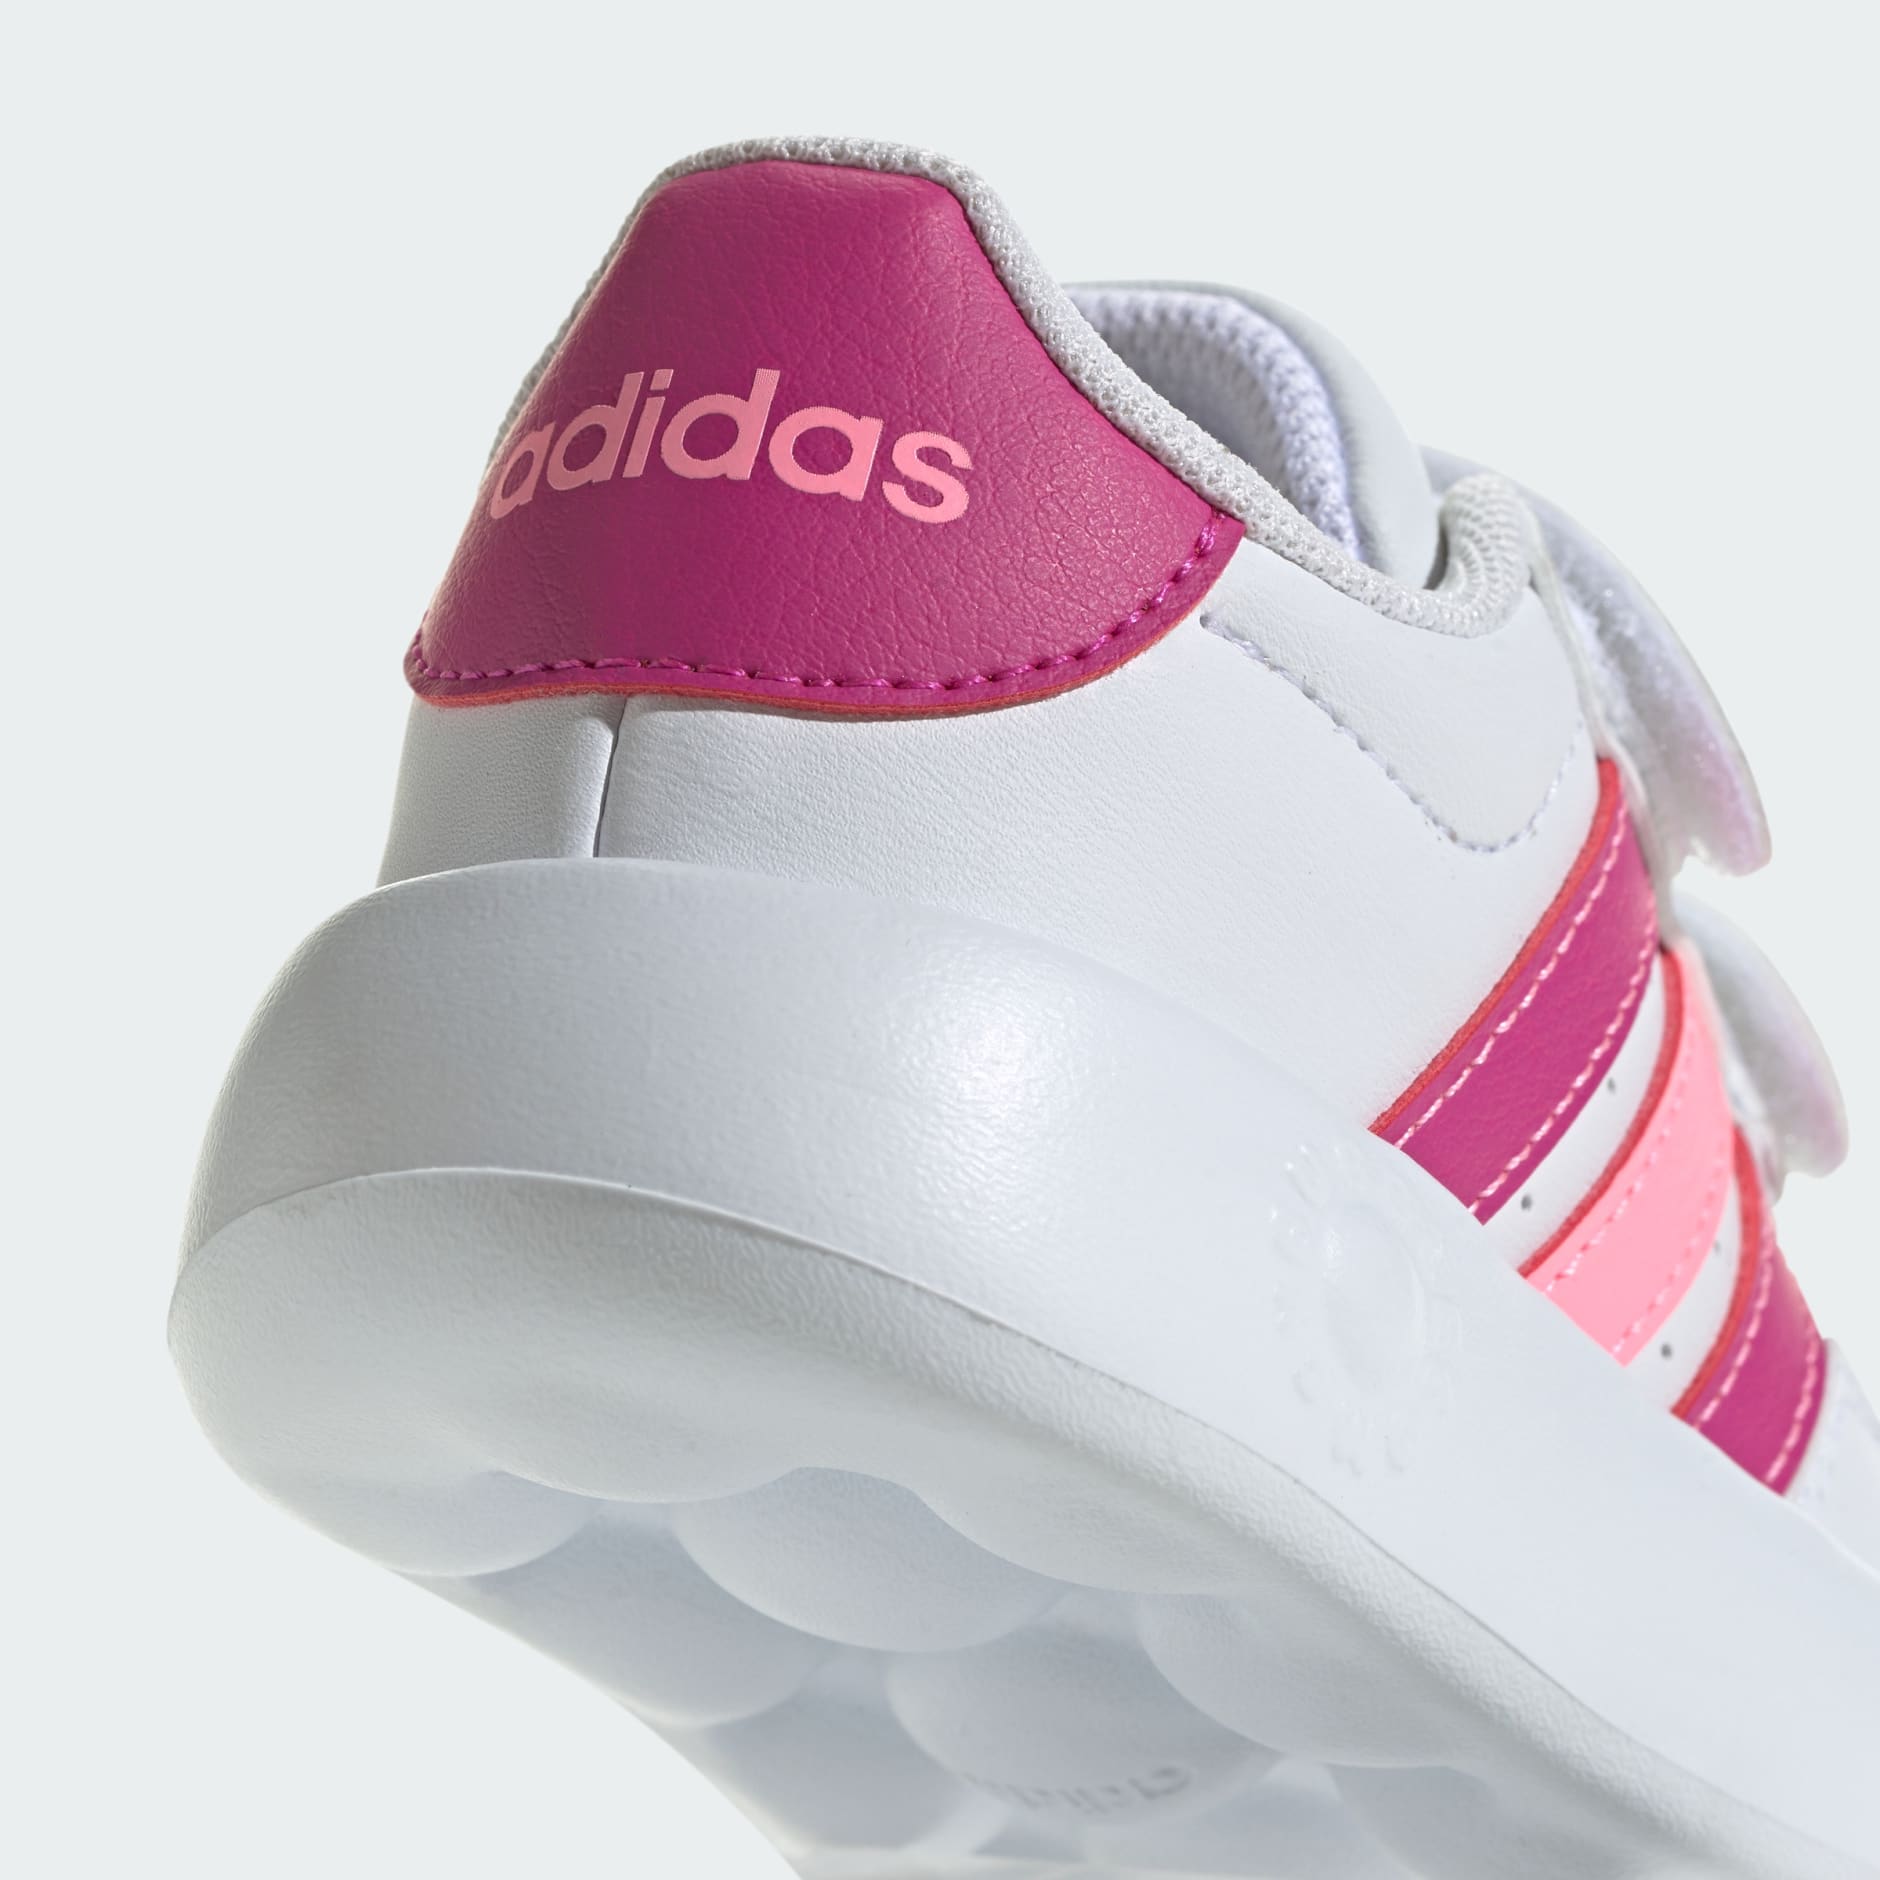 Shoes - Breaknet 2.0 Shoes Kids - White | adidas South Africa